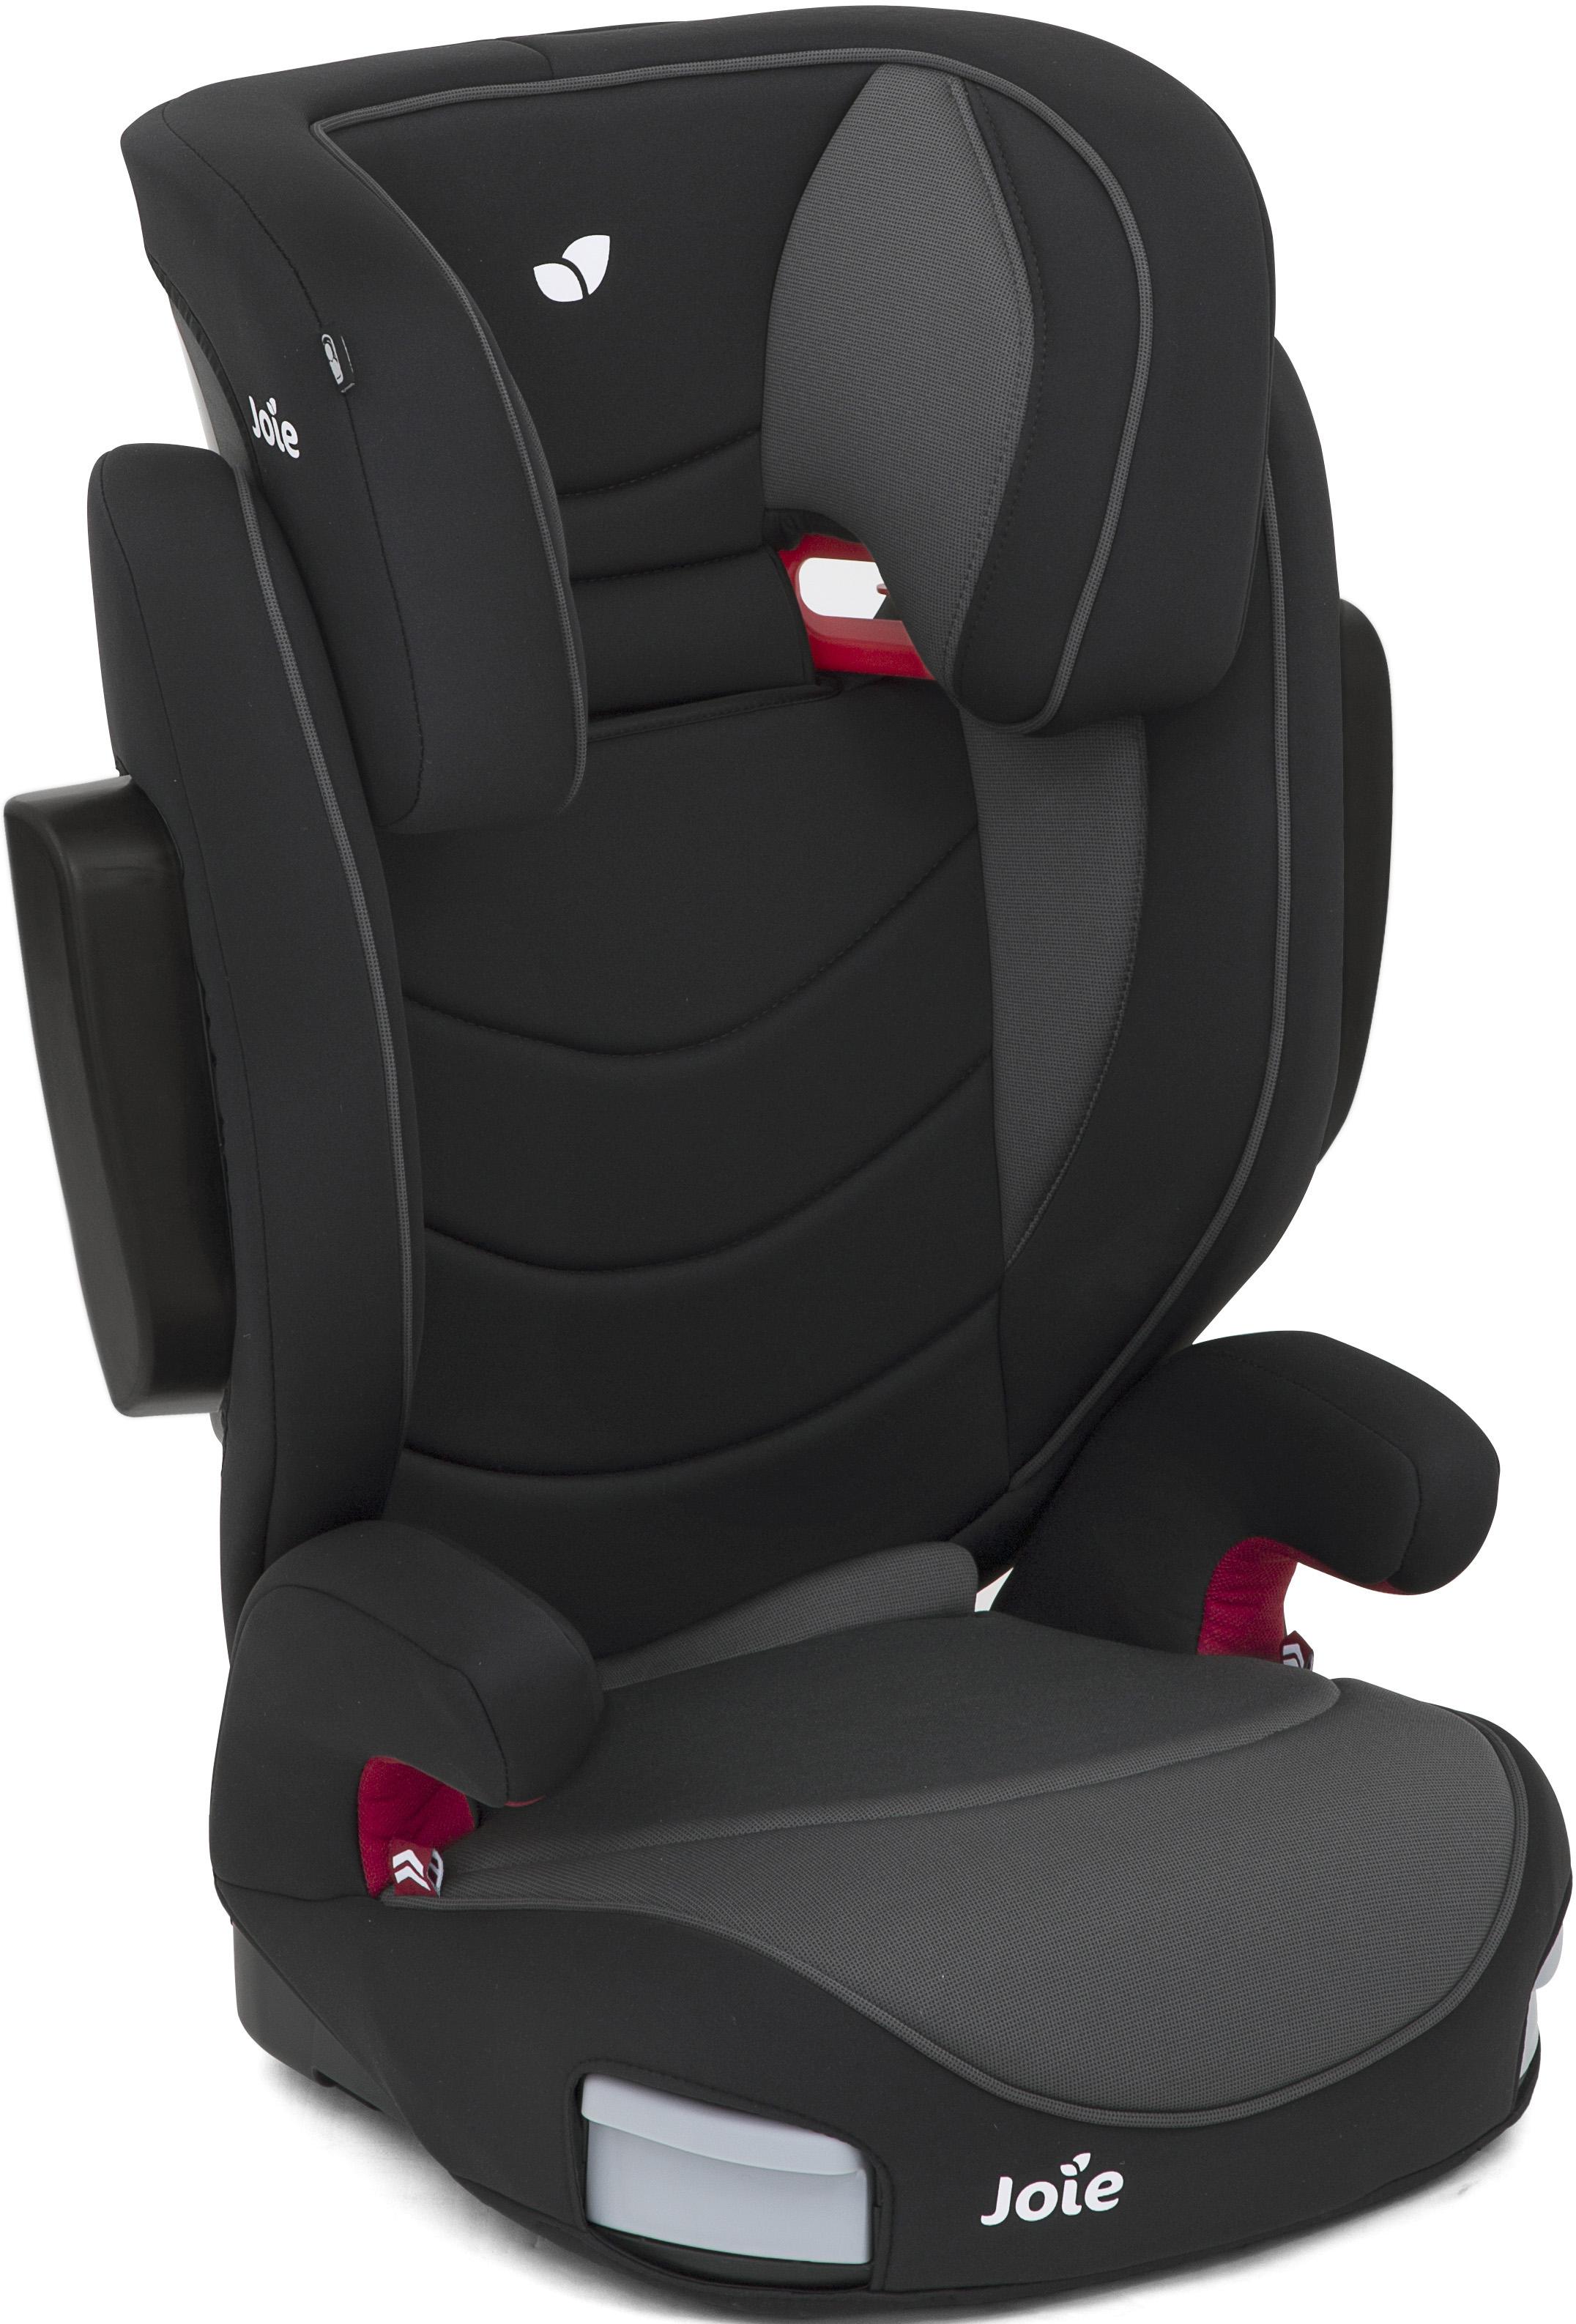 Joie Trillo Lx 2/3 Child Car Seat - Ember